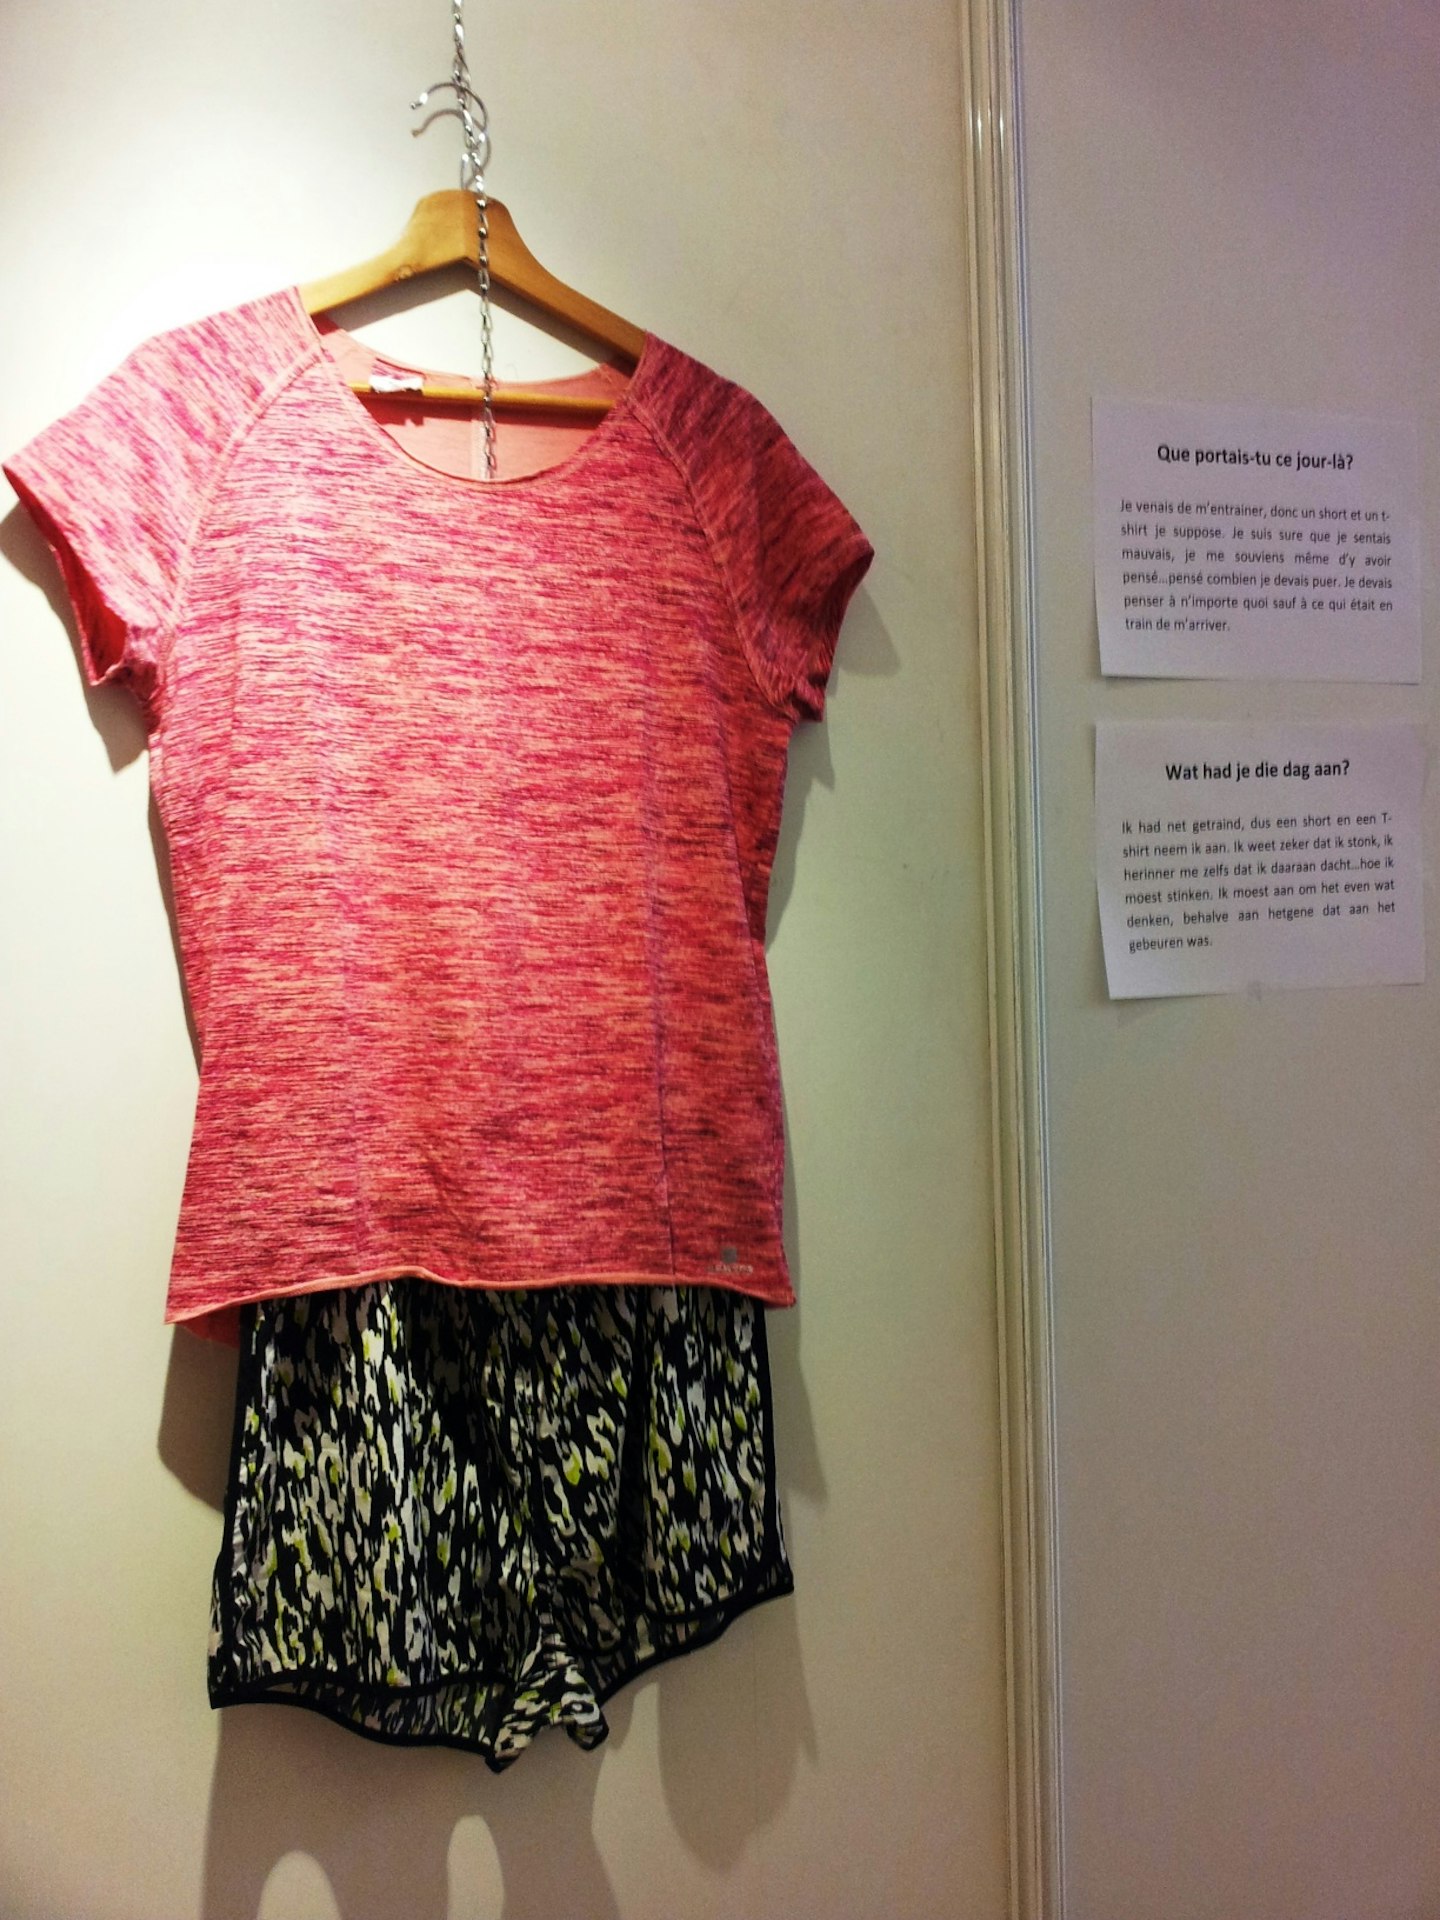 This Exhibition Displaying Clothing Worn By Rape Victims Makes An Important Point